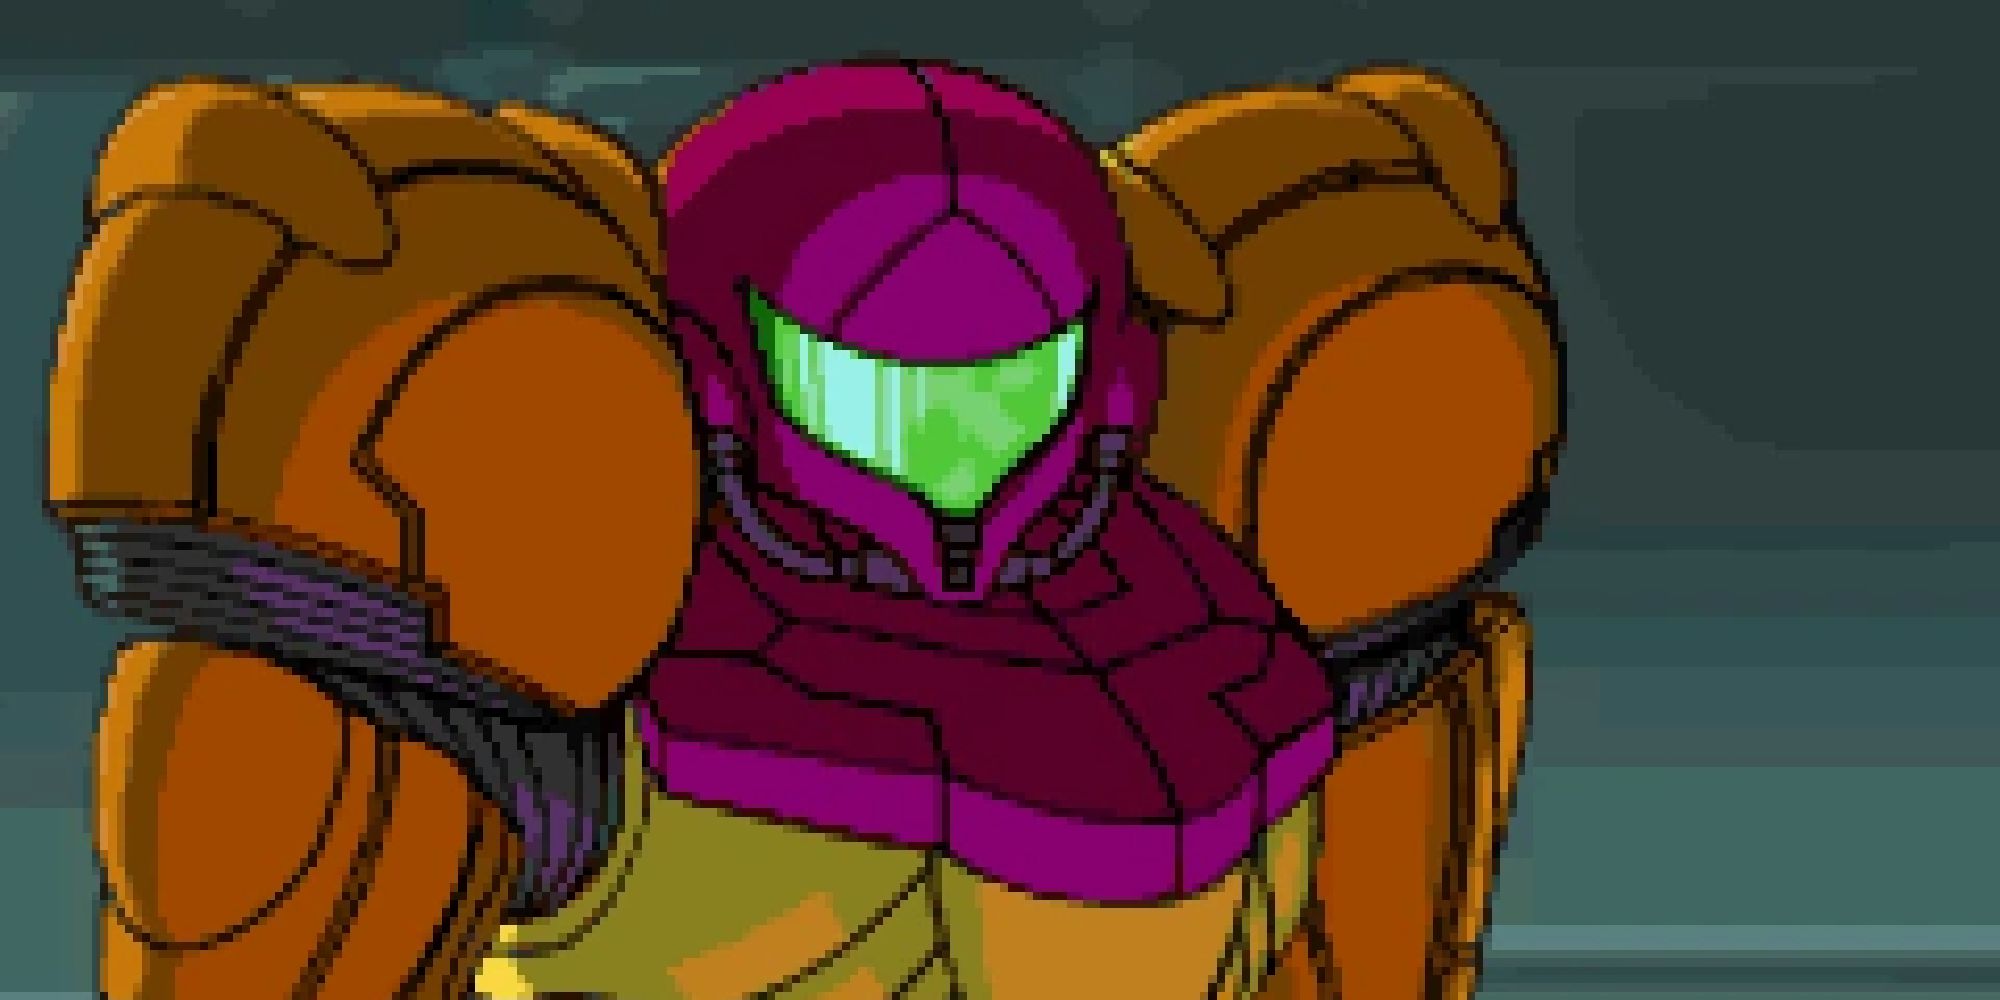 SA-X, the clone of Samus, appearing in Metroid Fusion